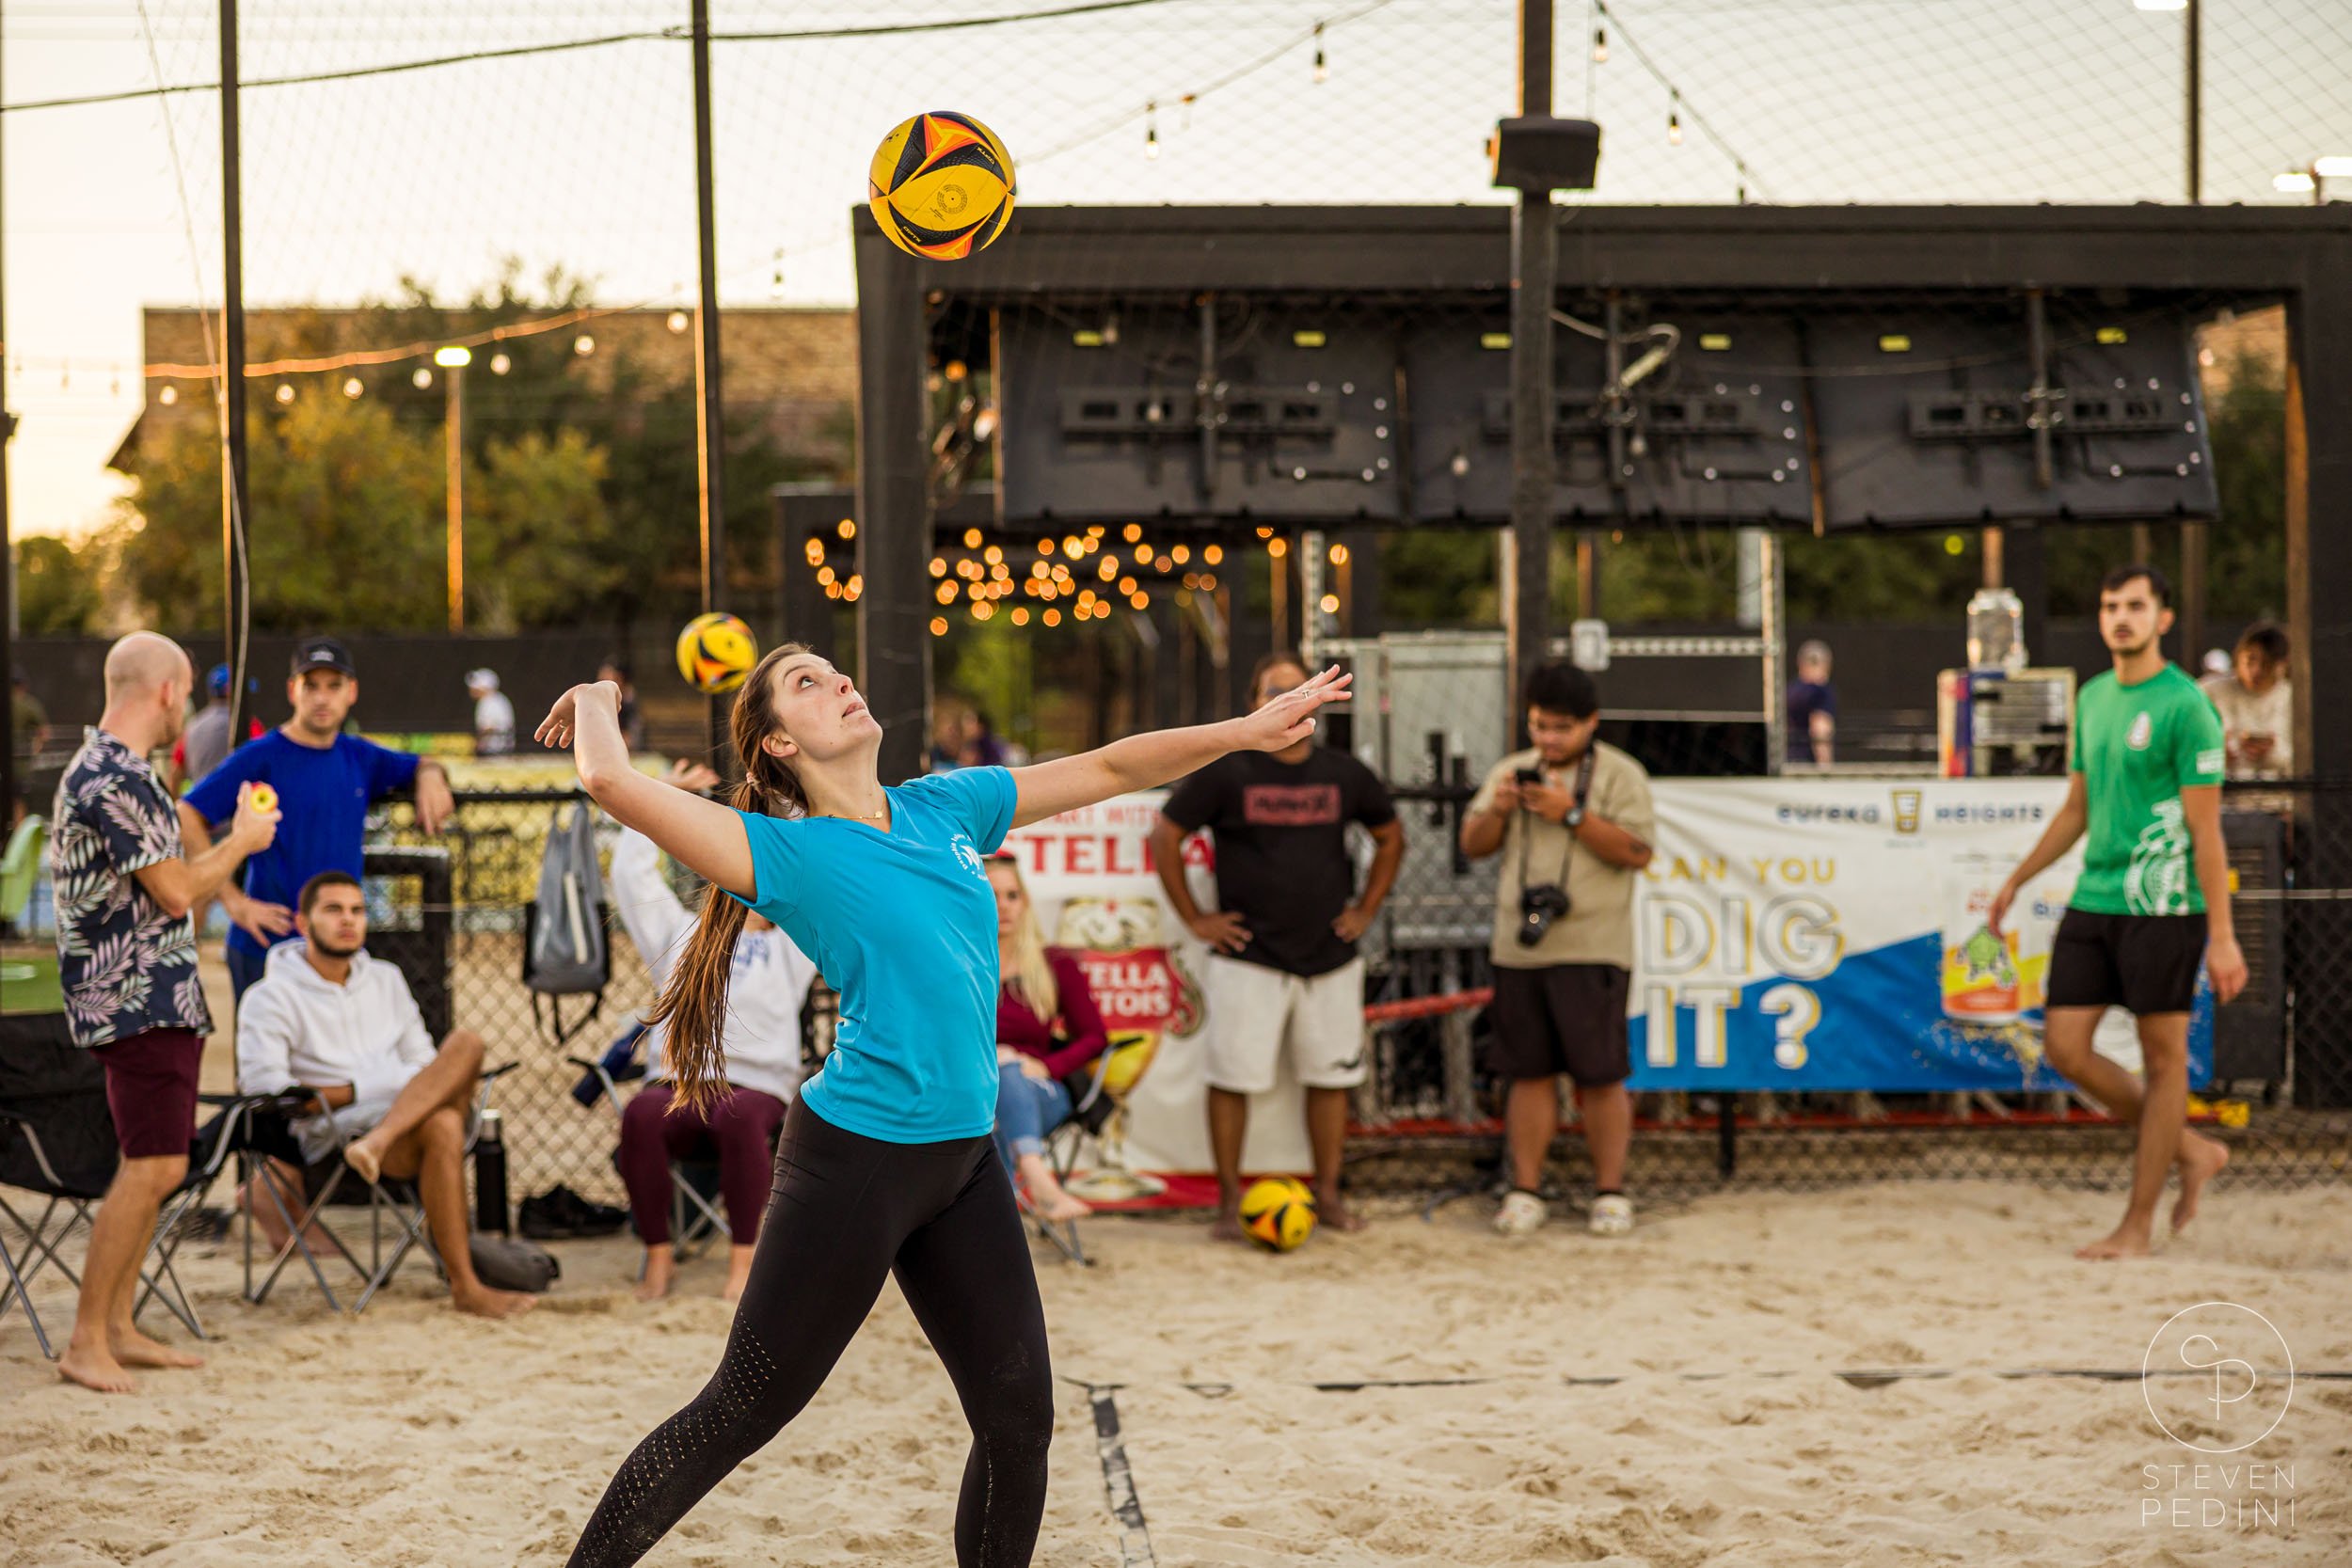 Steven Pedini Photography - Bumpy Pickle - Sand Volleyball - Houston TX - World Cup of Volleyball - 00221.jpg